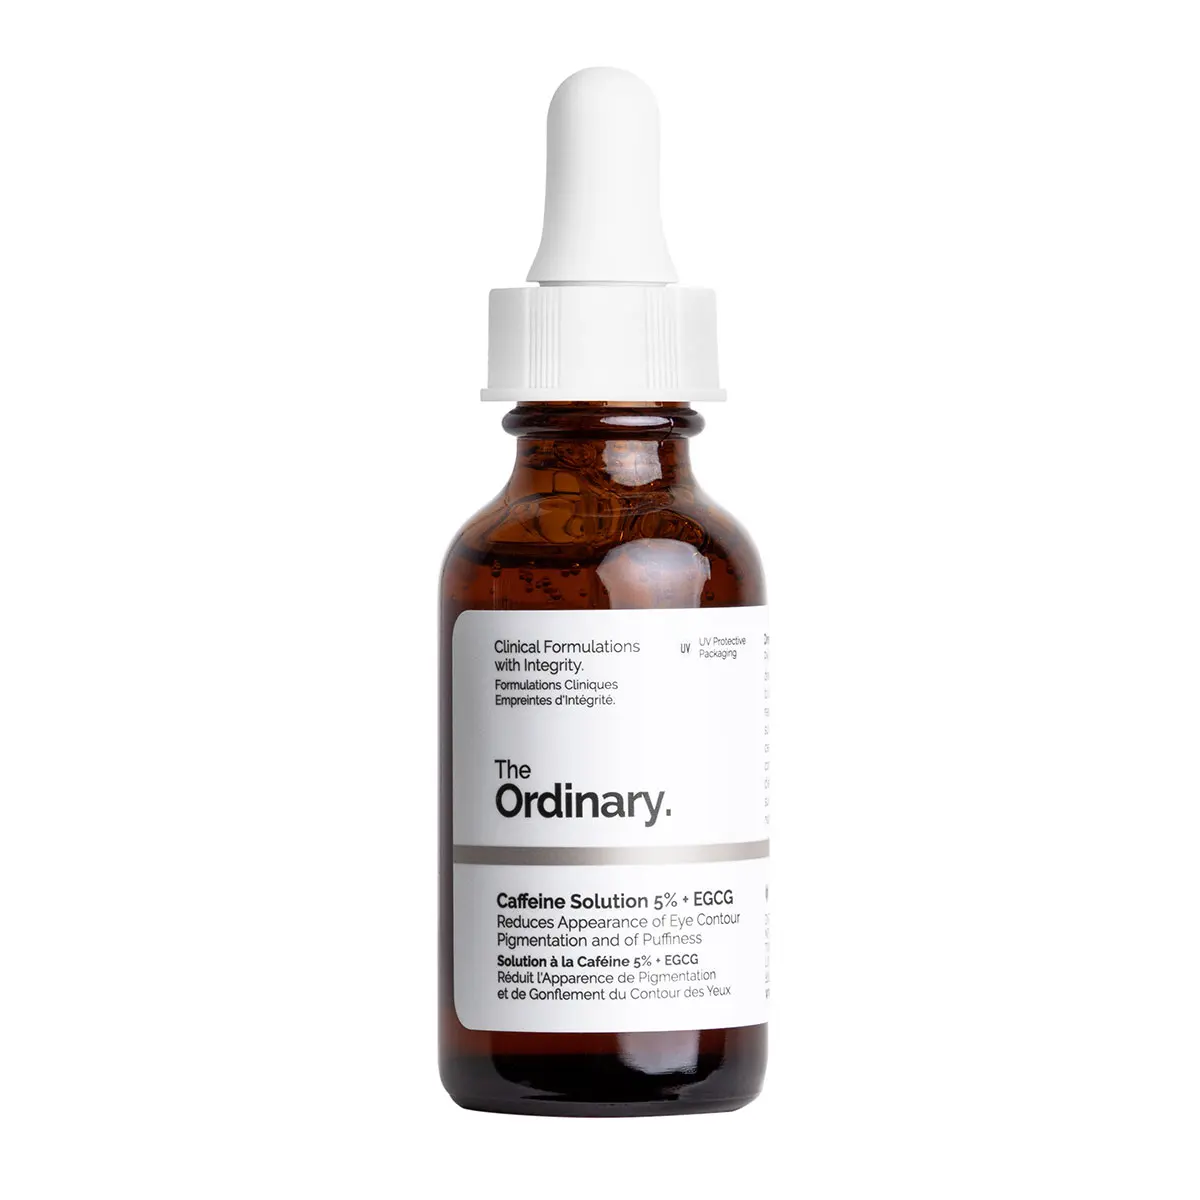 The Ordinary Caffeine Solution 5% + EGCG 30ml Discounts and Cashback